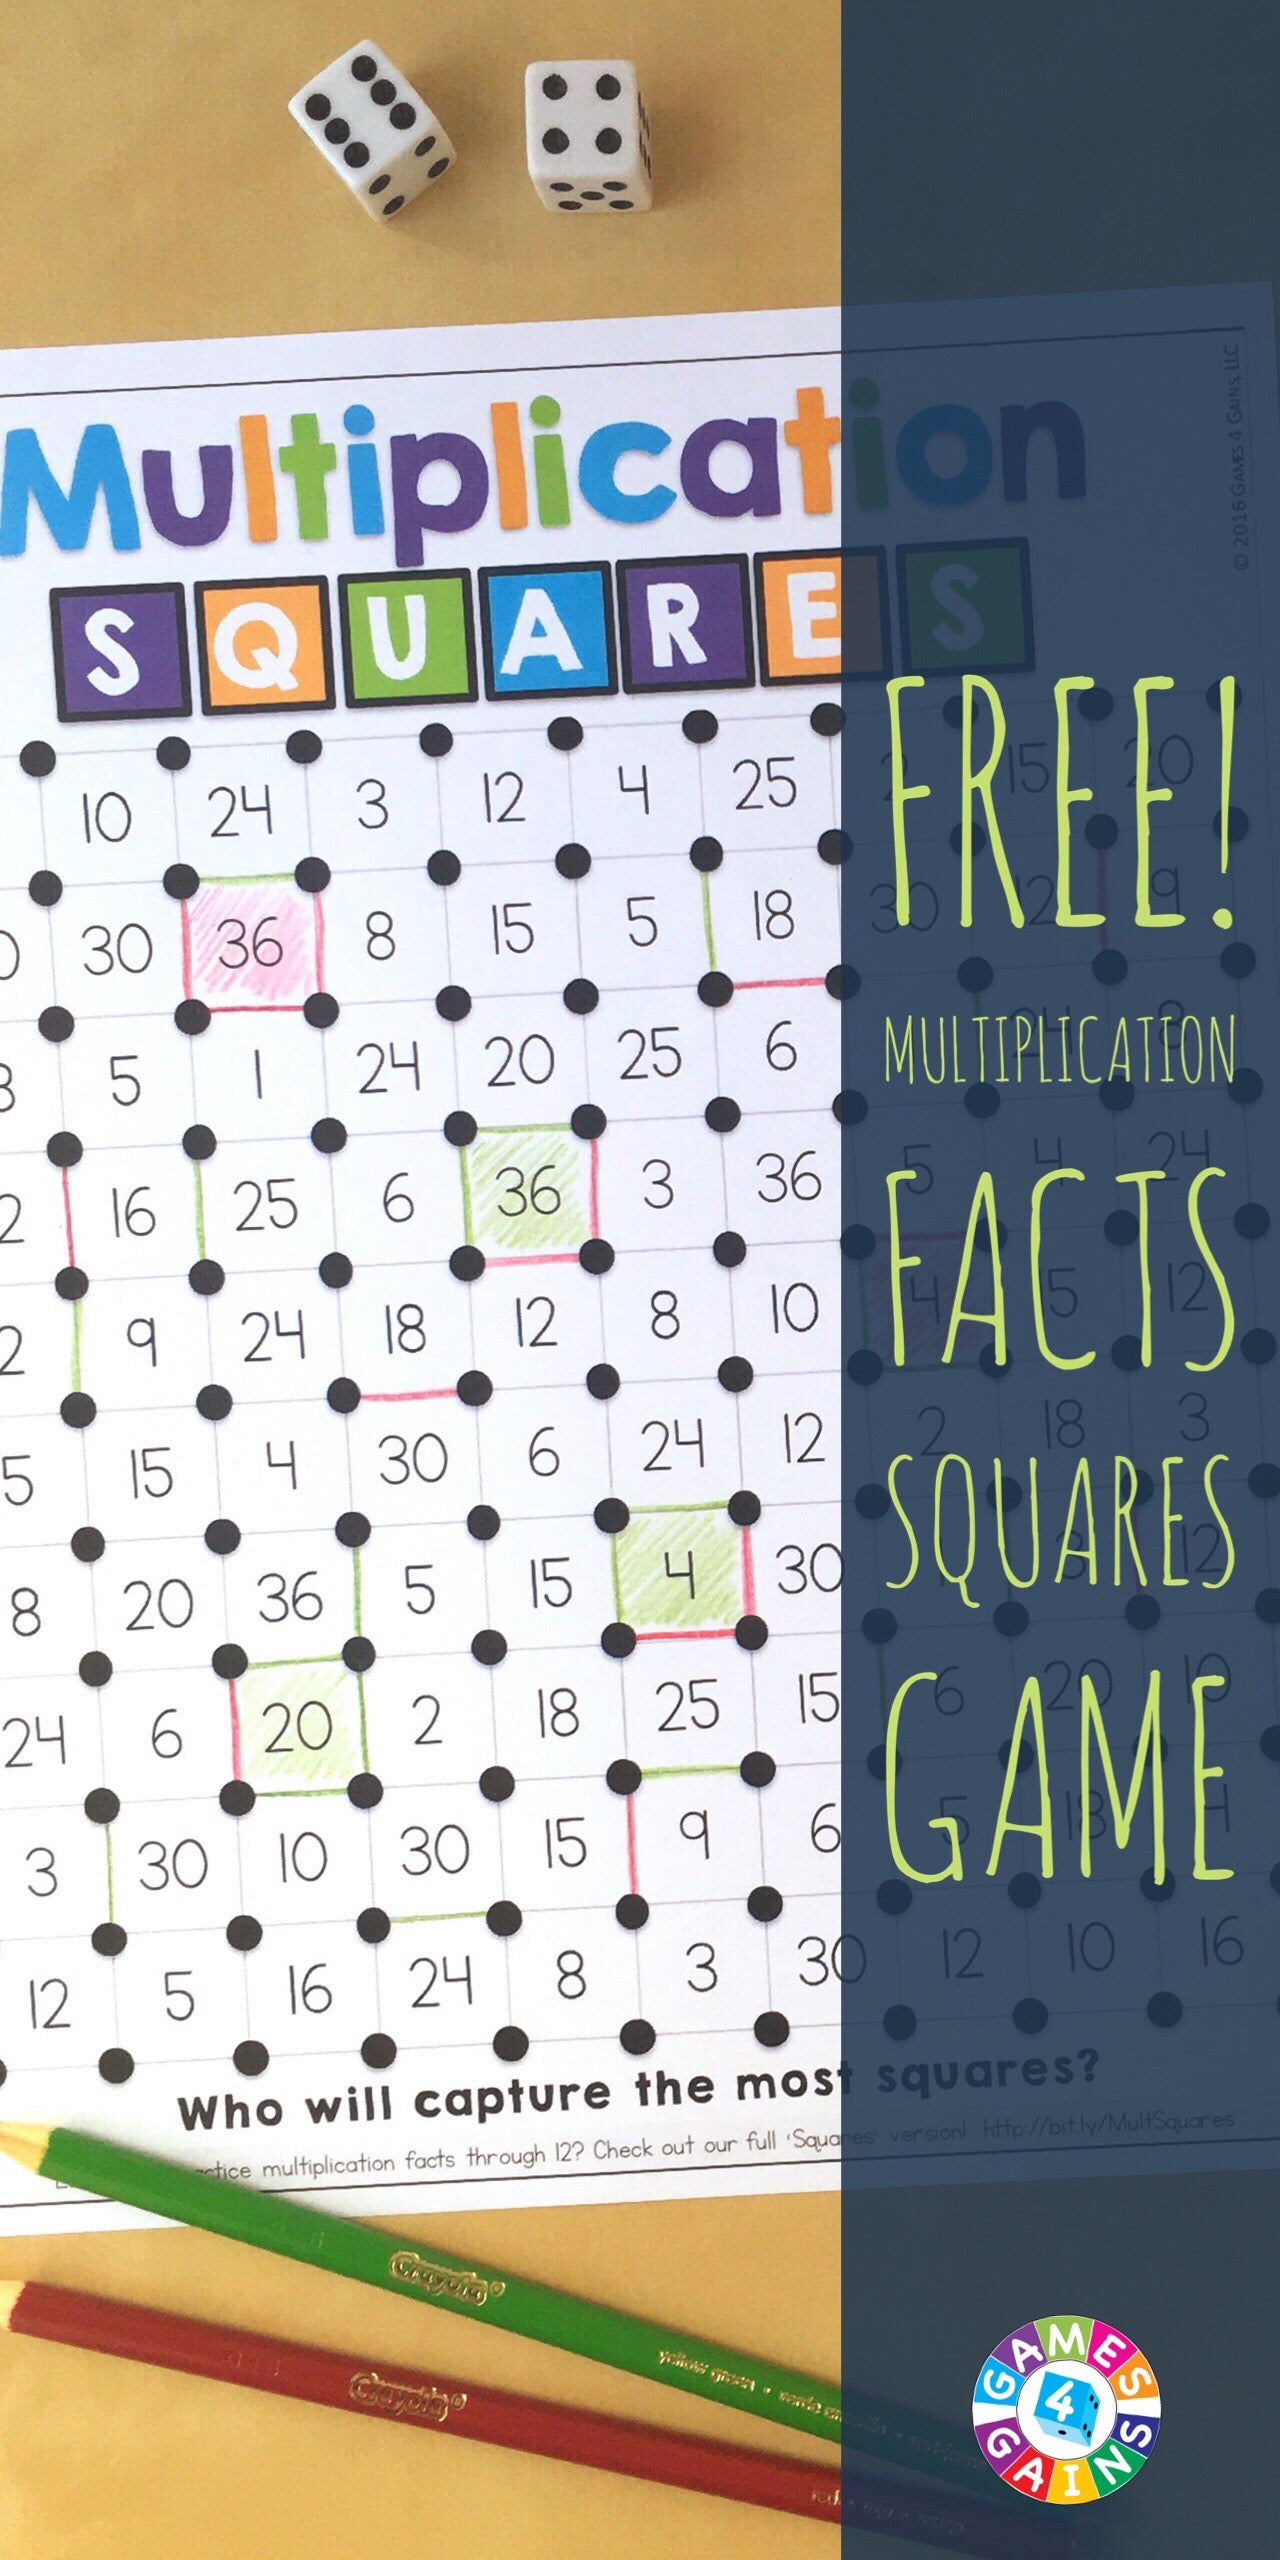 We've "Mathified" The Squares Game! – Games 4 Gains